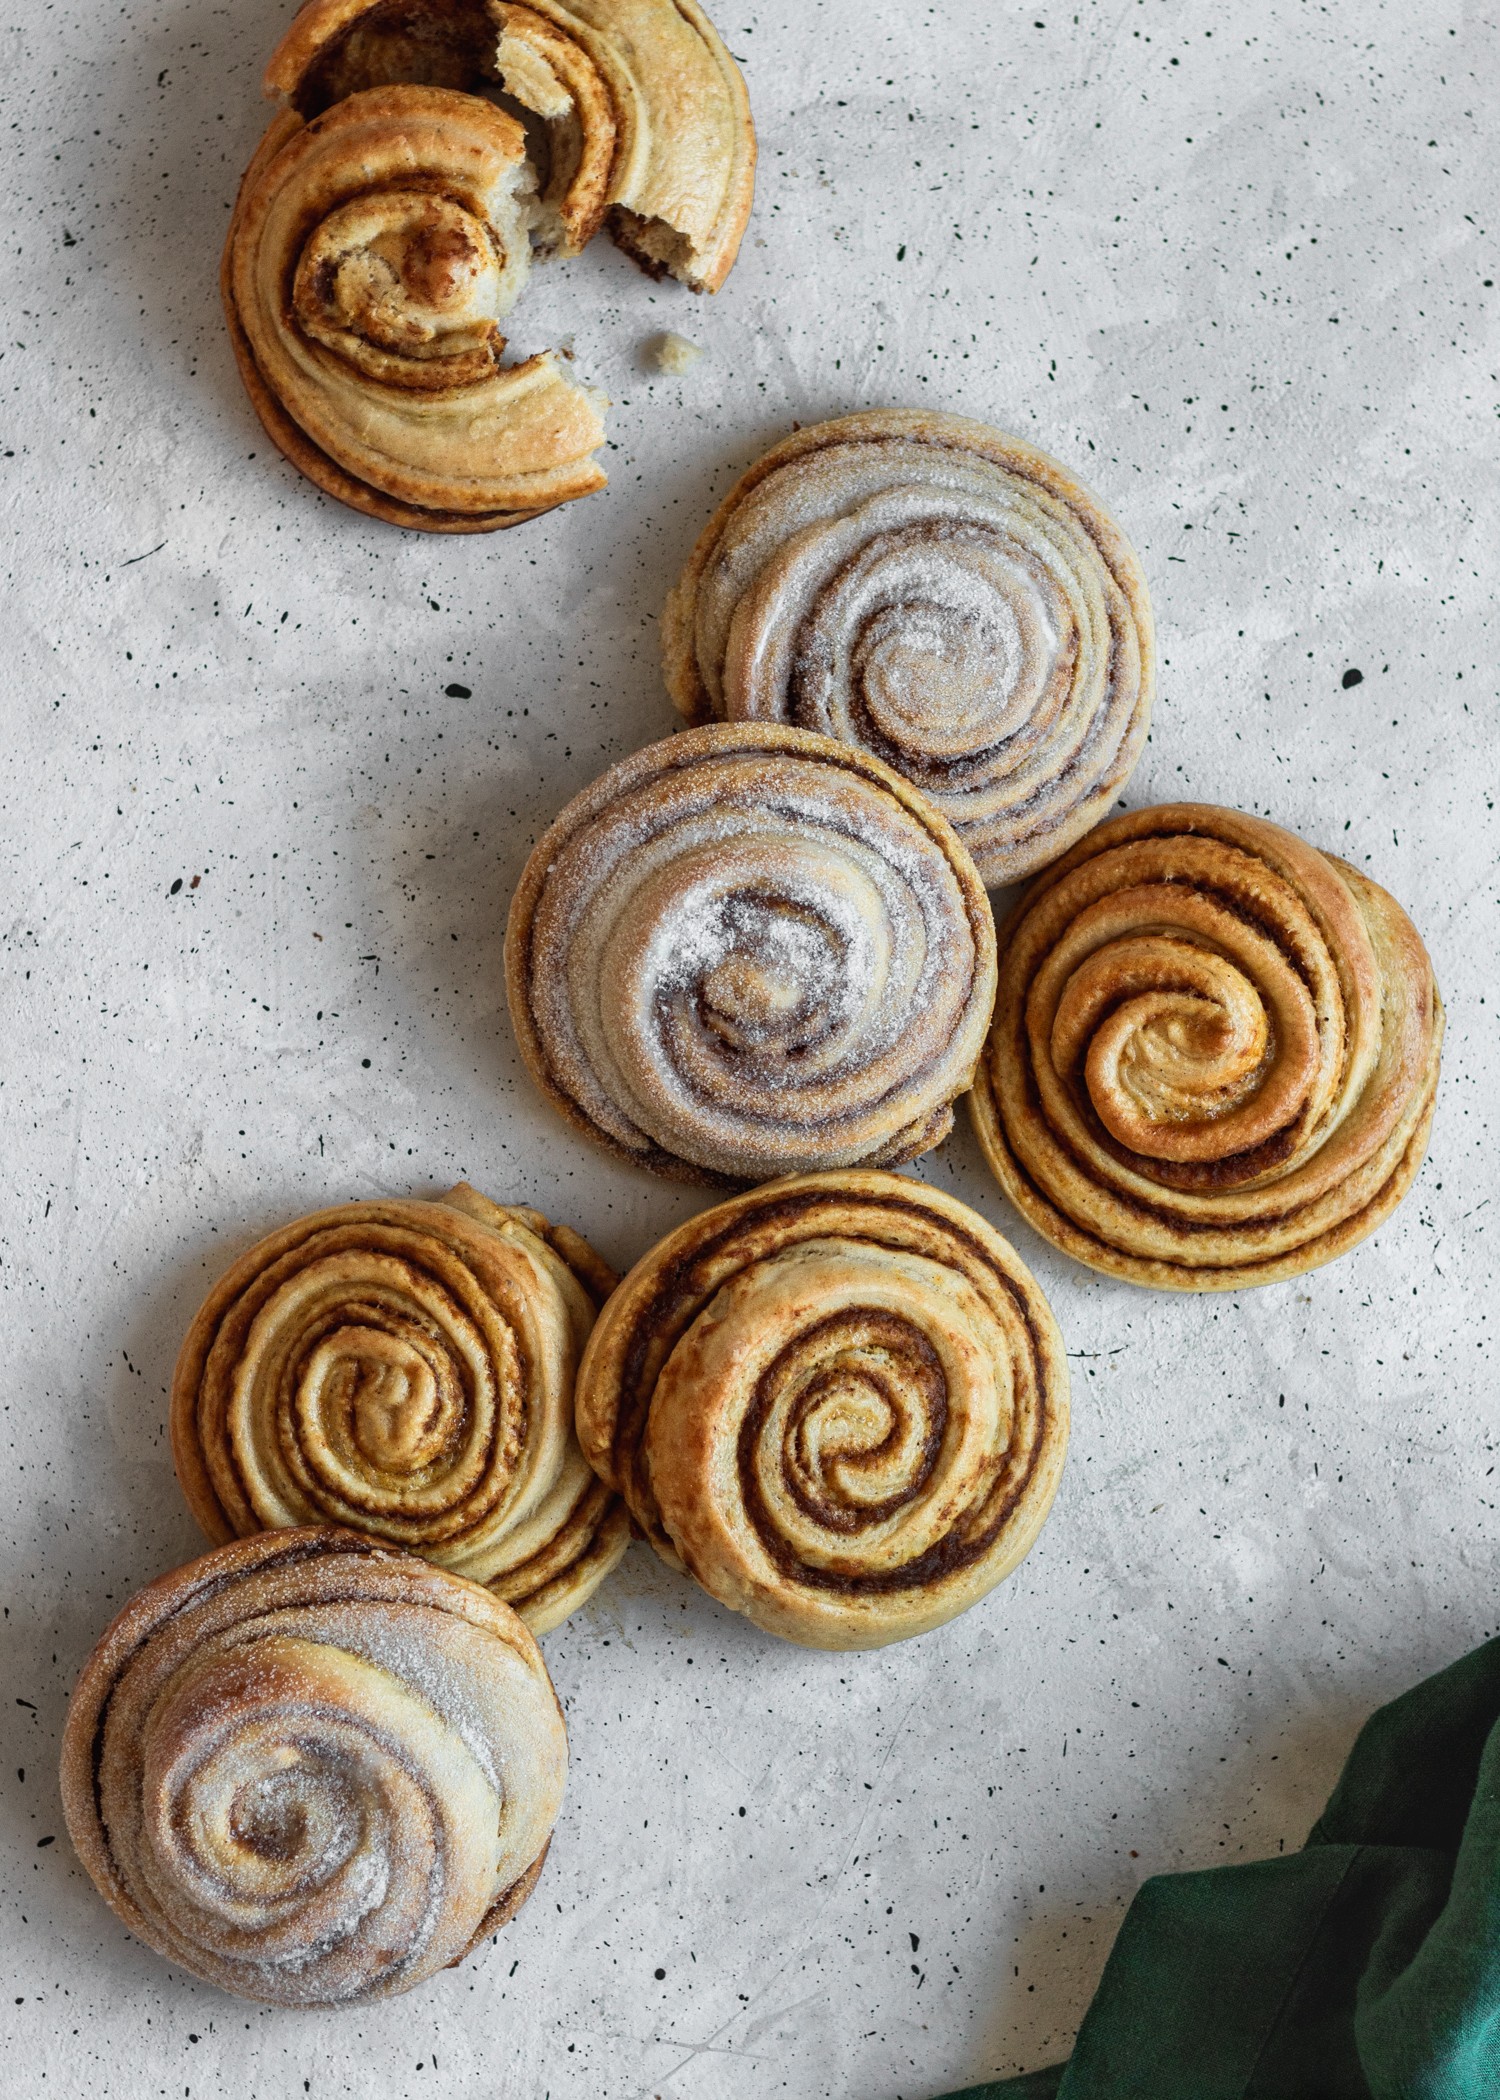 A bird's eye shot of pumpkin morning buns on a speckled white table next to an emerald napkin.